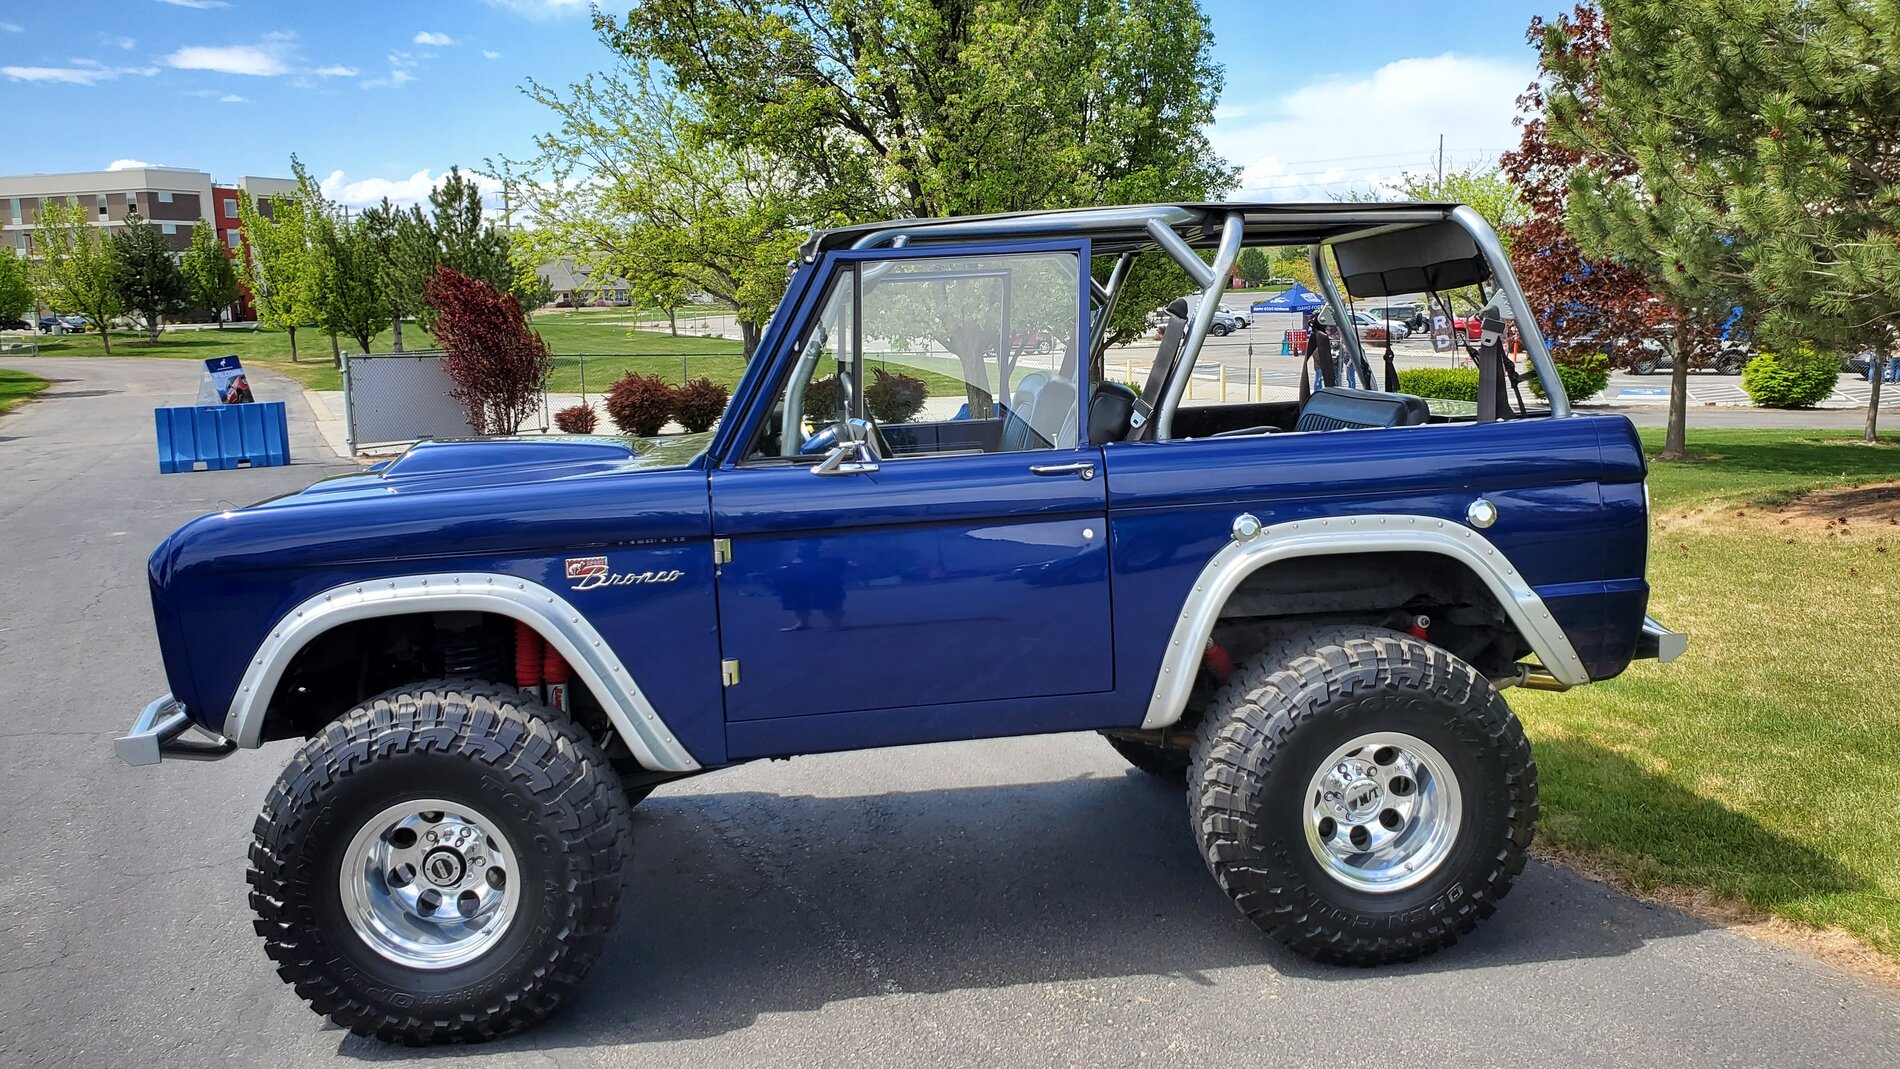 Ford Bronco Idaho Bronco show if you can call it that 20210501_125935